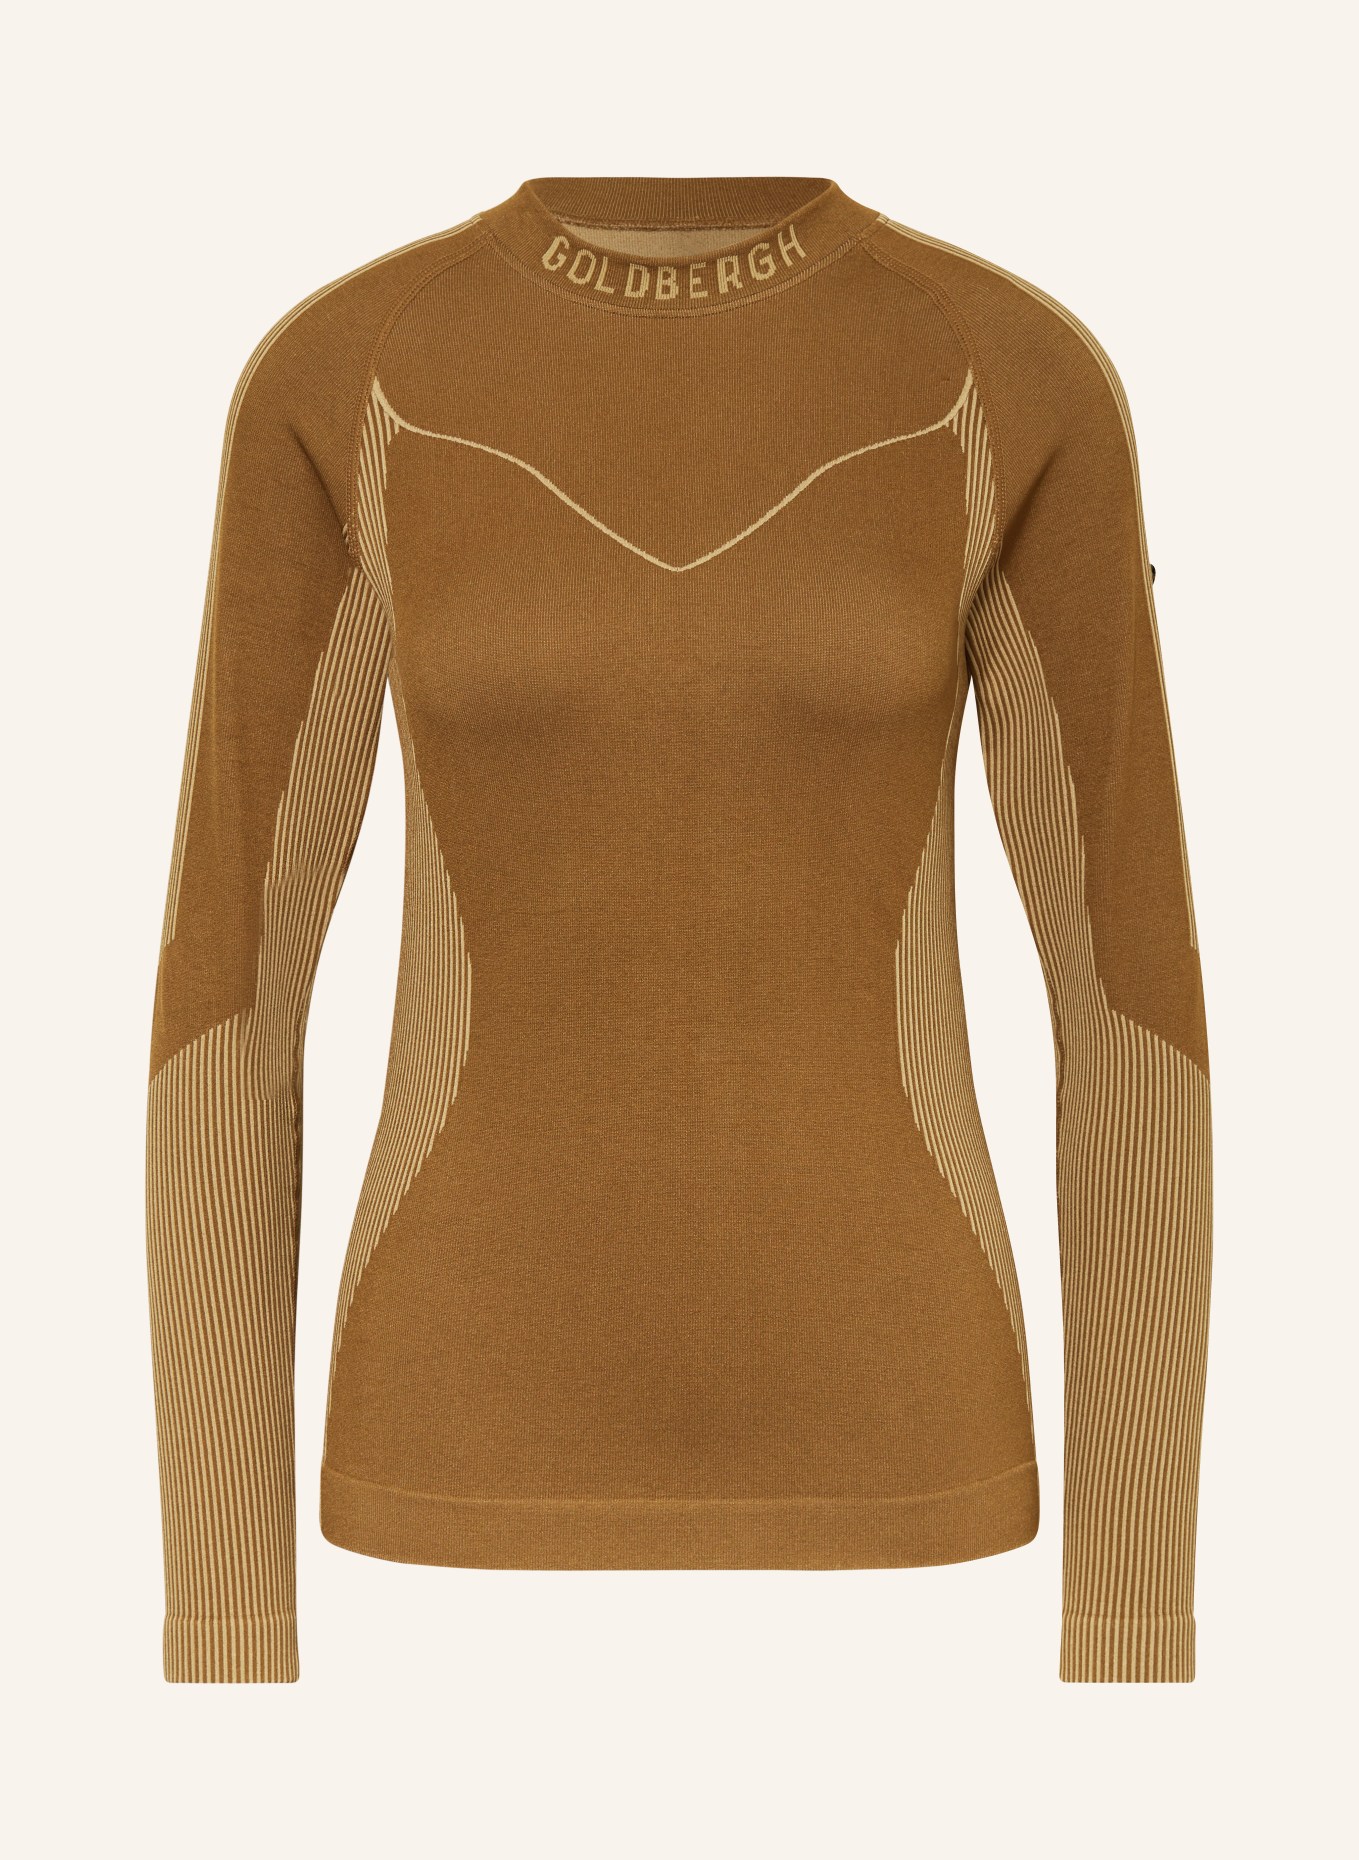 GOLDBERGH Functional underwear shirt FAST, Color: BROWN/ LIGHT BROWN (Image 1)